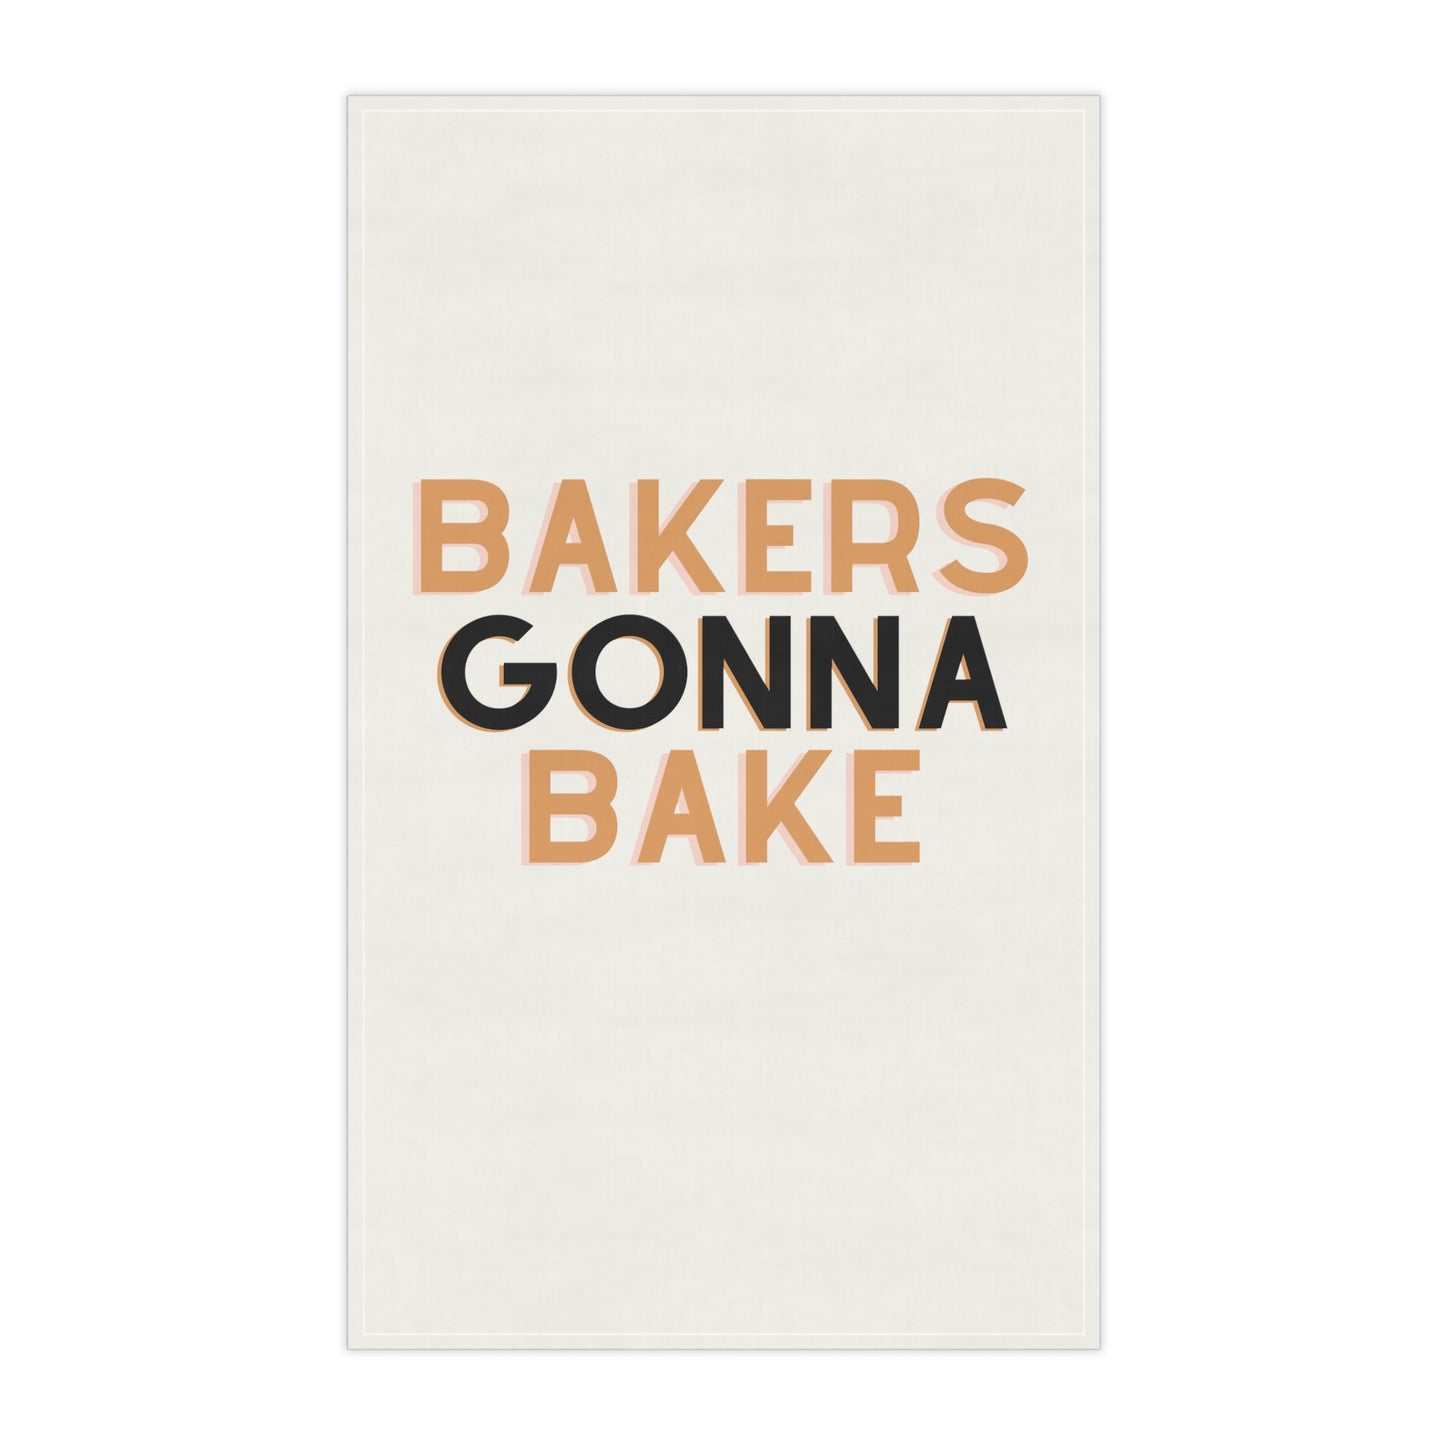 "Bakers Gonna Bake" kitchen towel as the perfect gift for bakers.